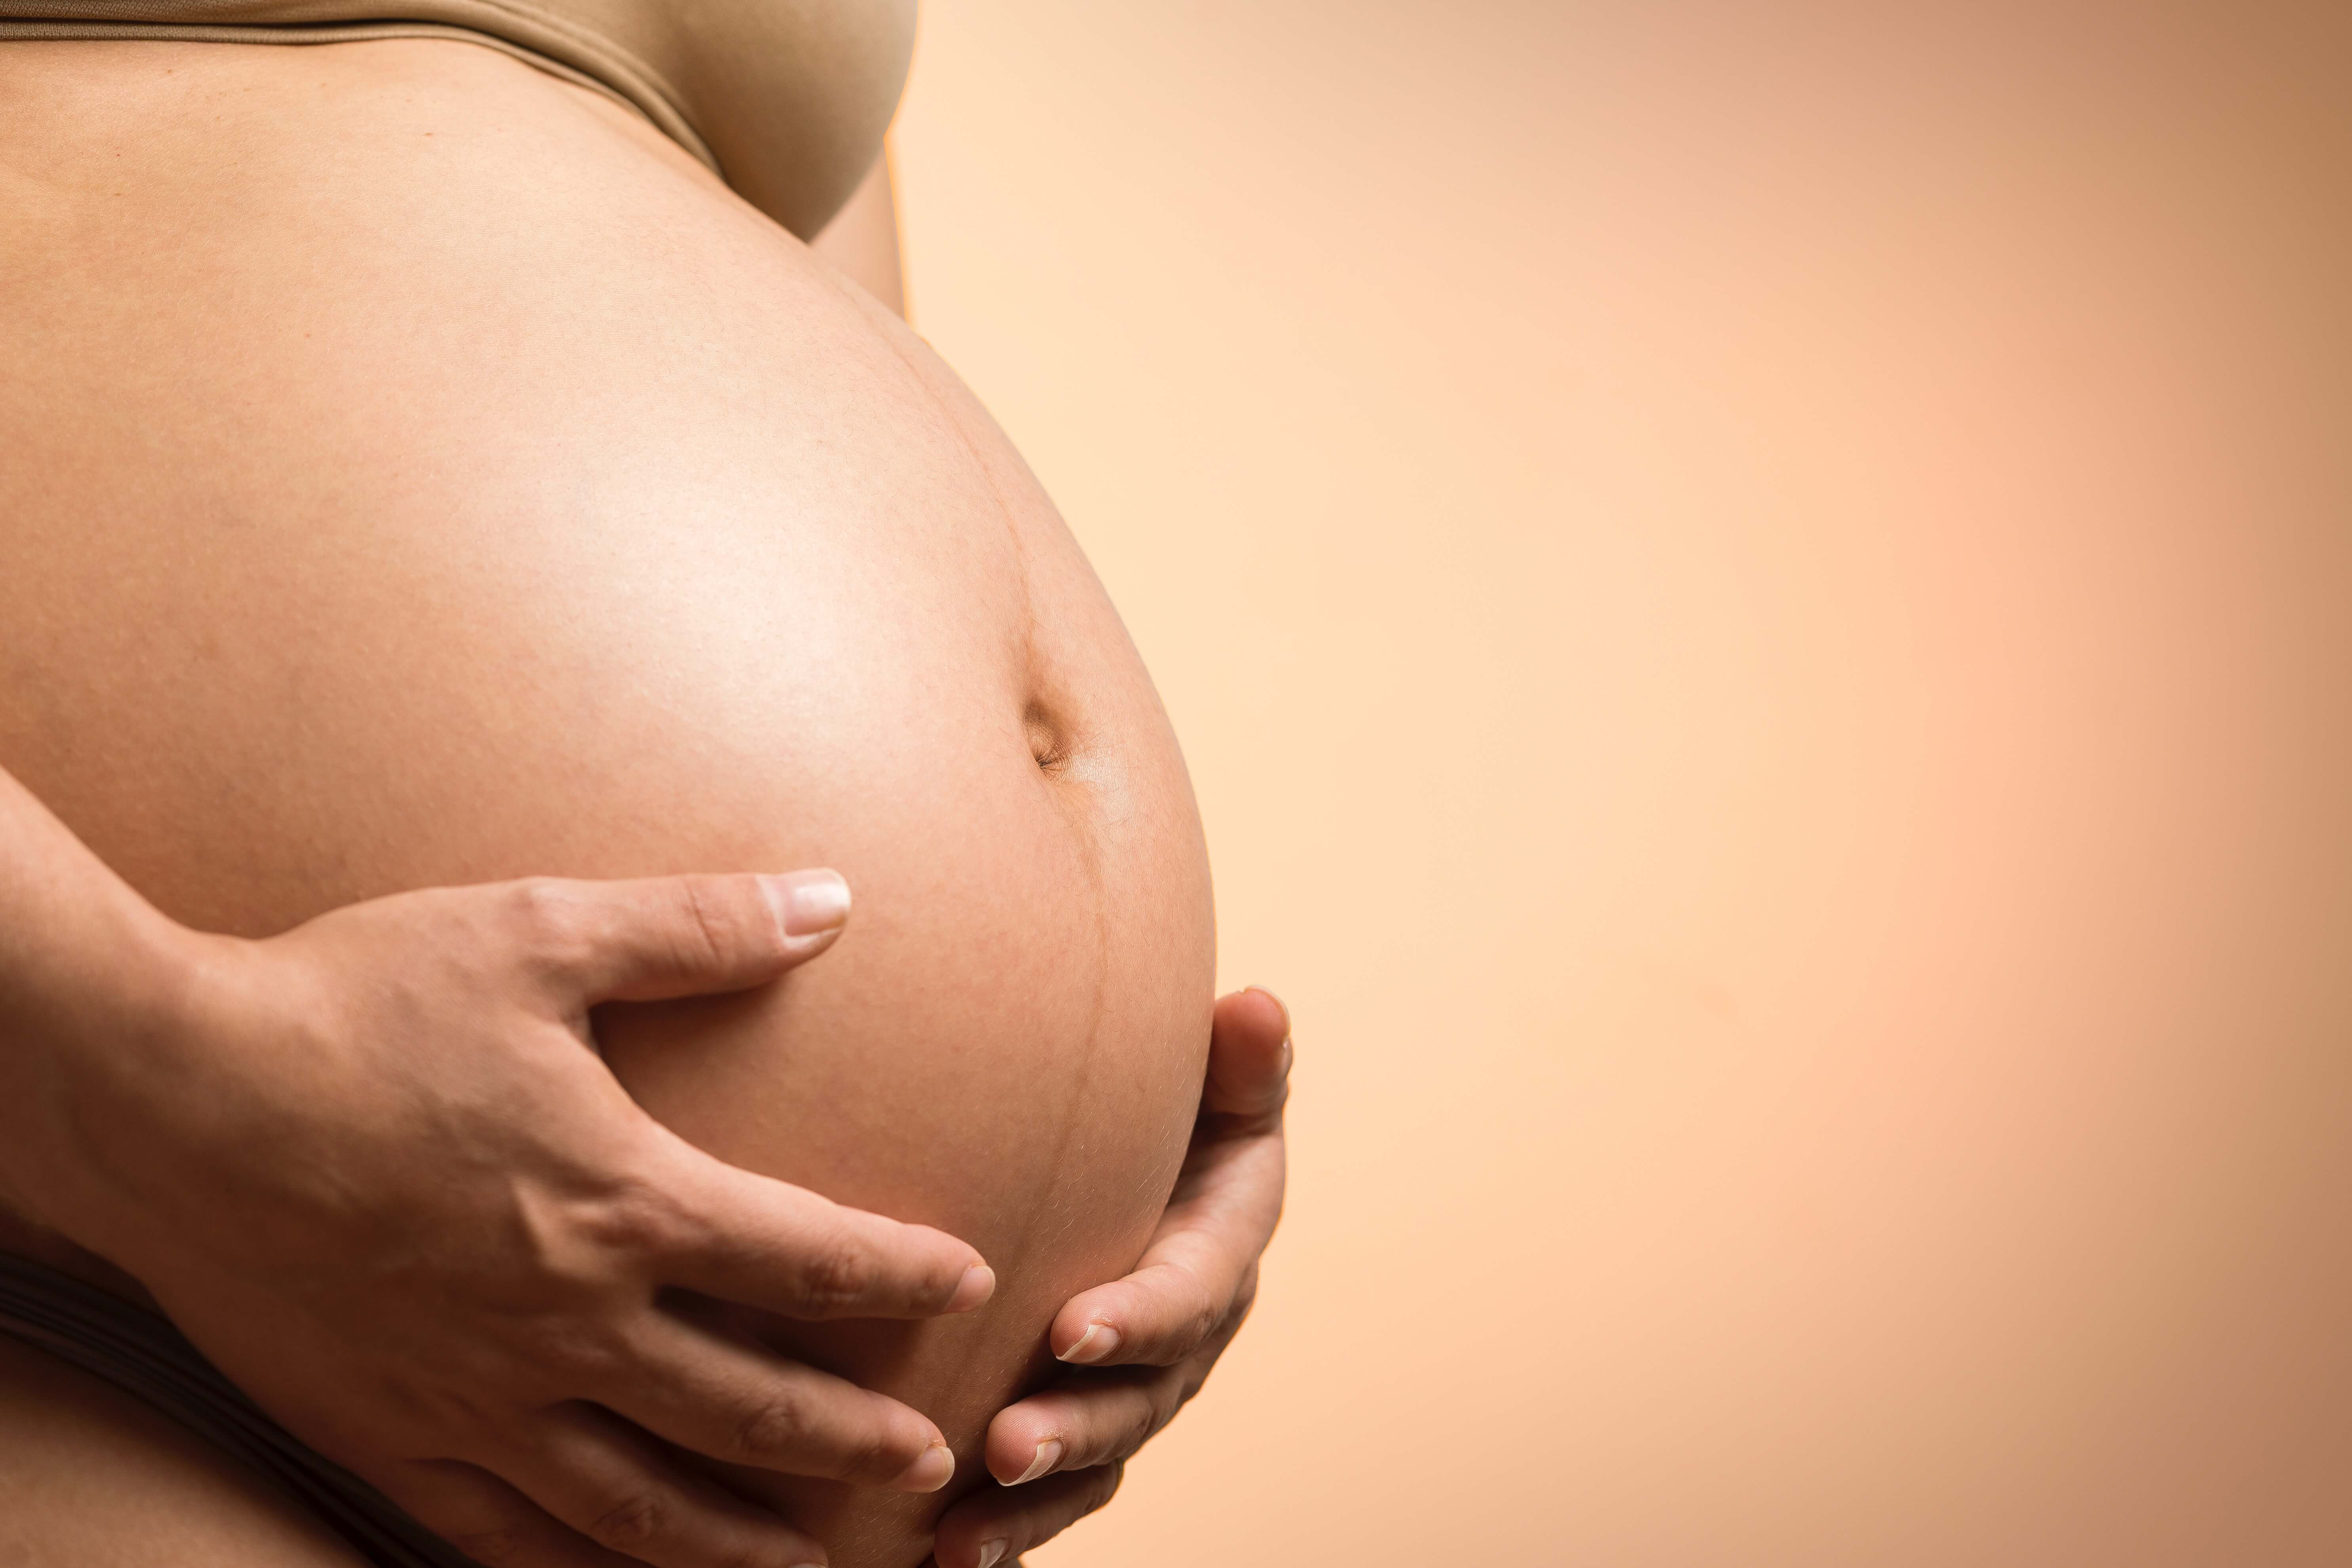 Latin America region with second-highest rate of teenage pregnancy